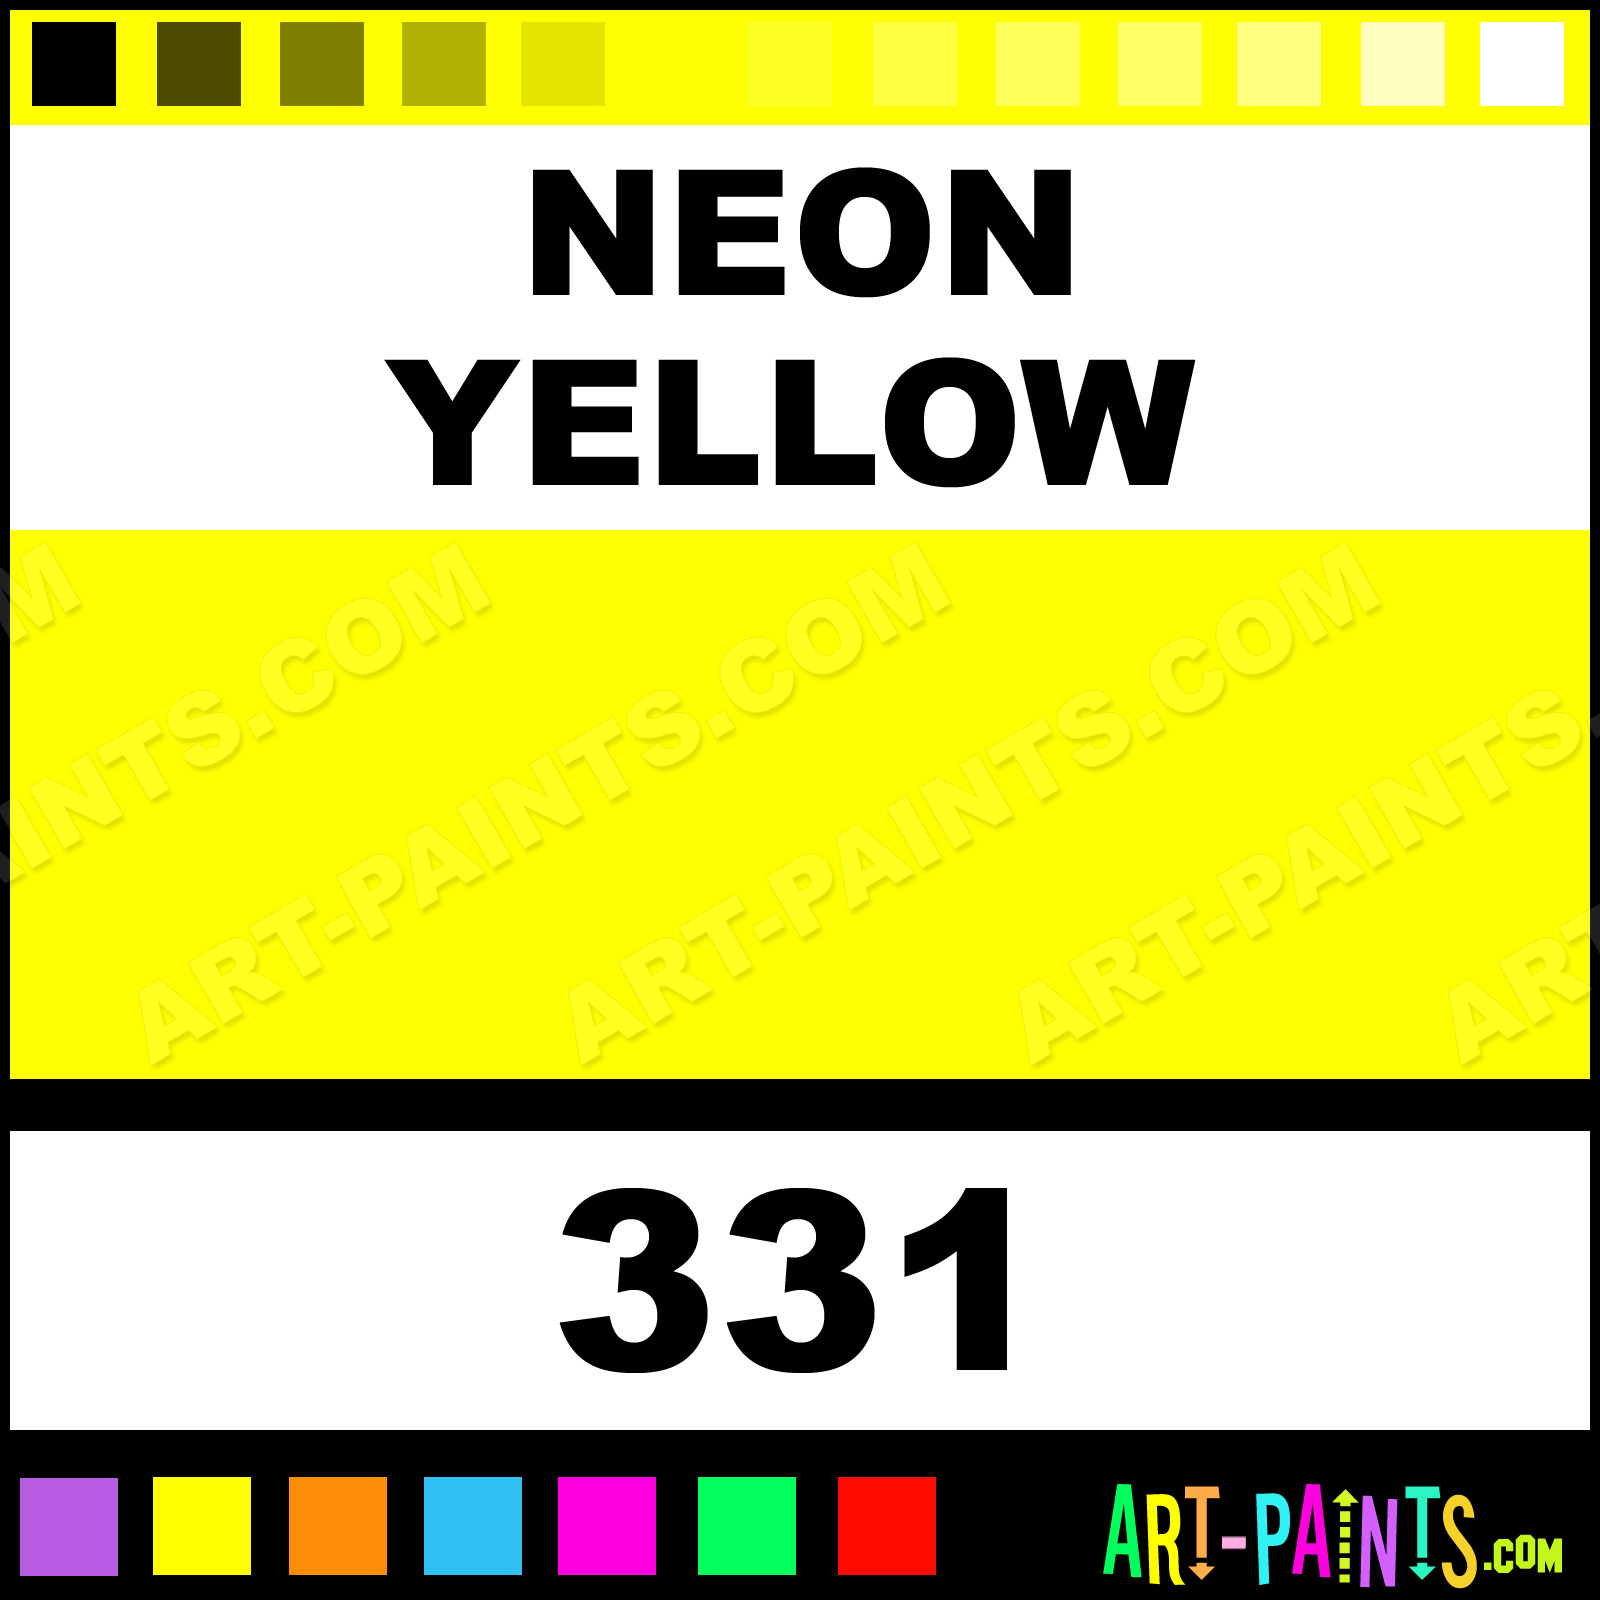 Neon Yellow Lacquer Airbrush Spray Paints - 331 - Neon Yellow